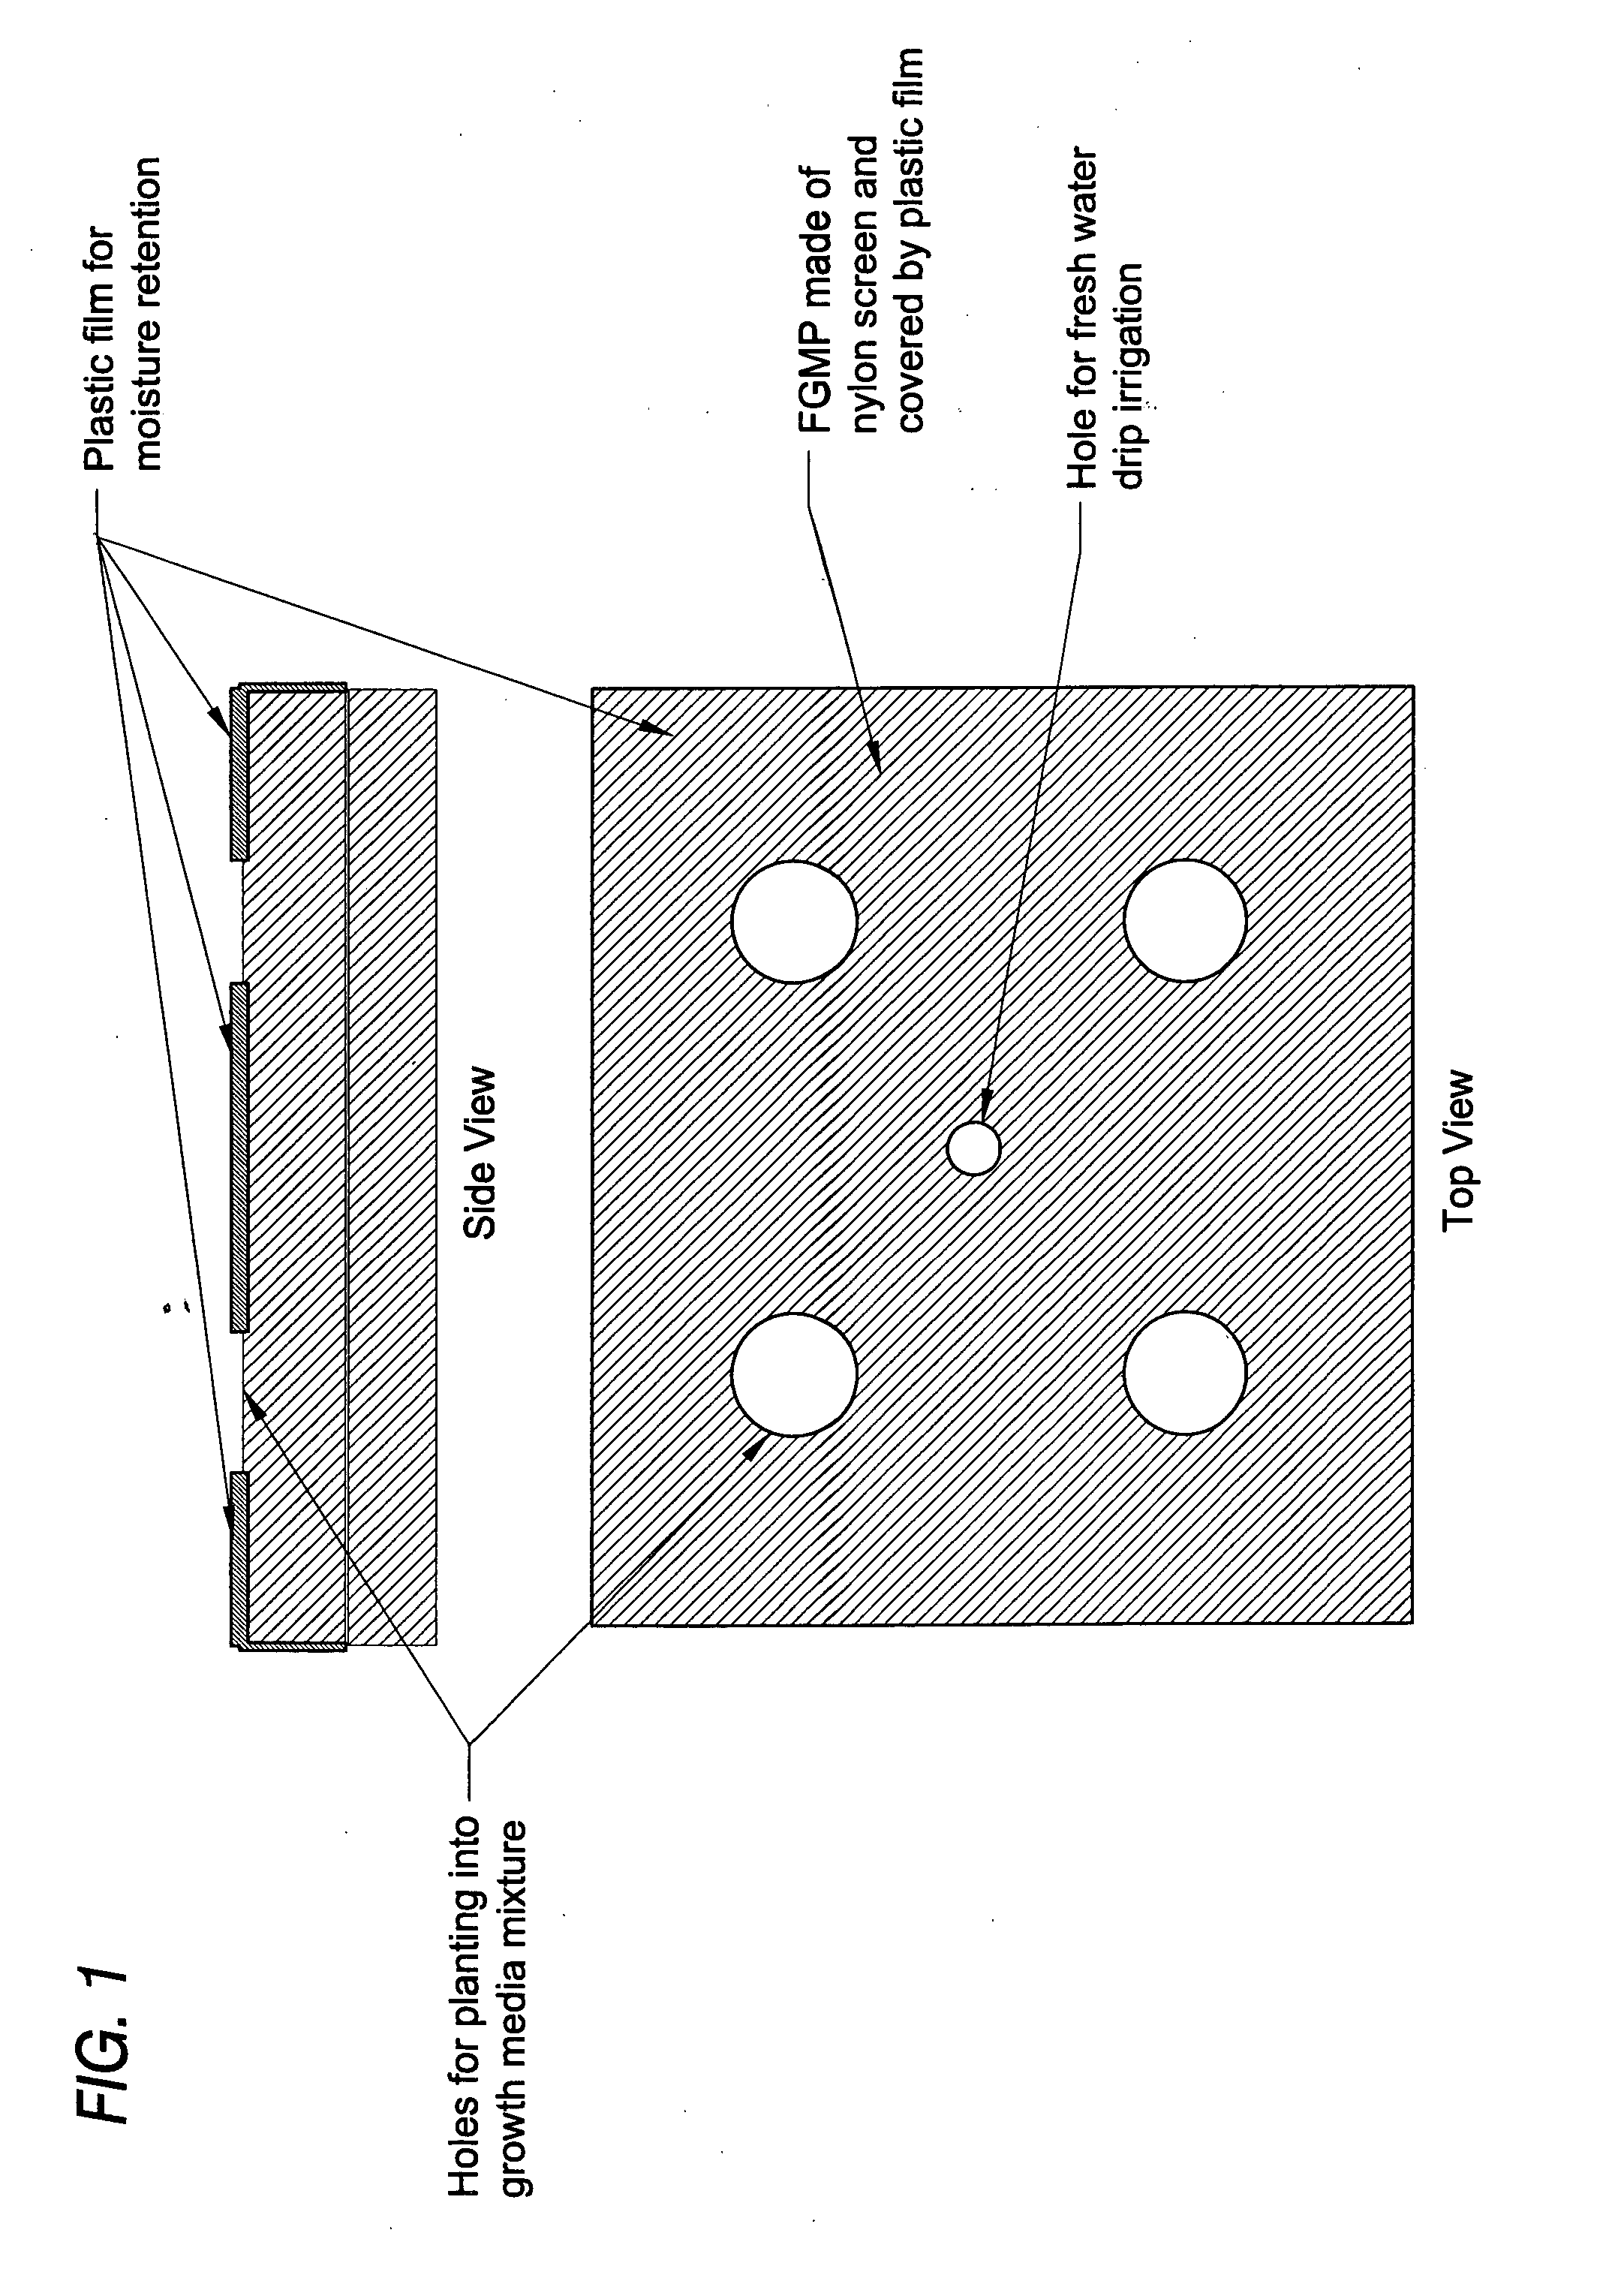 Floating plant cultivation platform and method for growing terrestrial plants in saline water of various salinities for multiple purposes